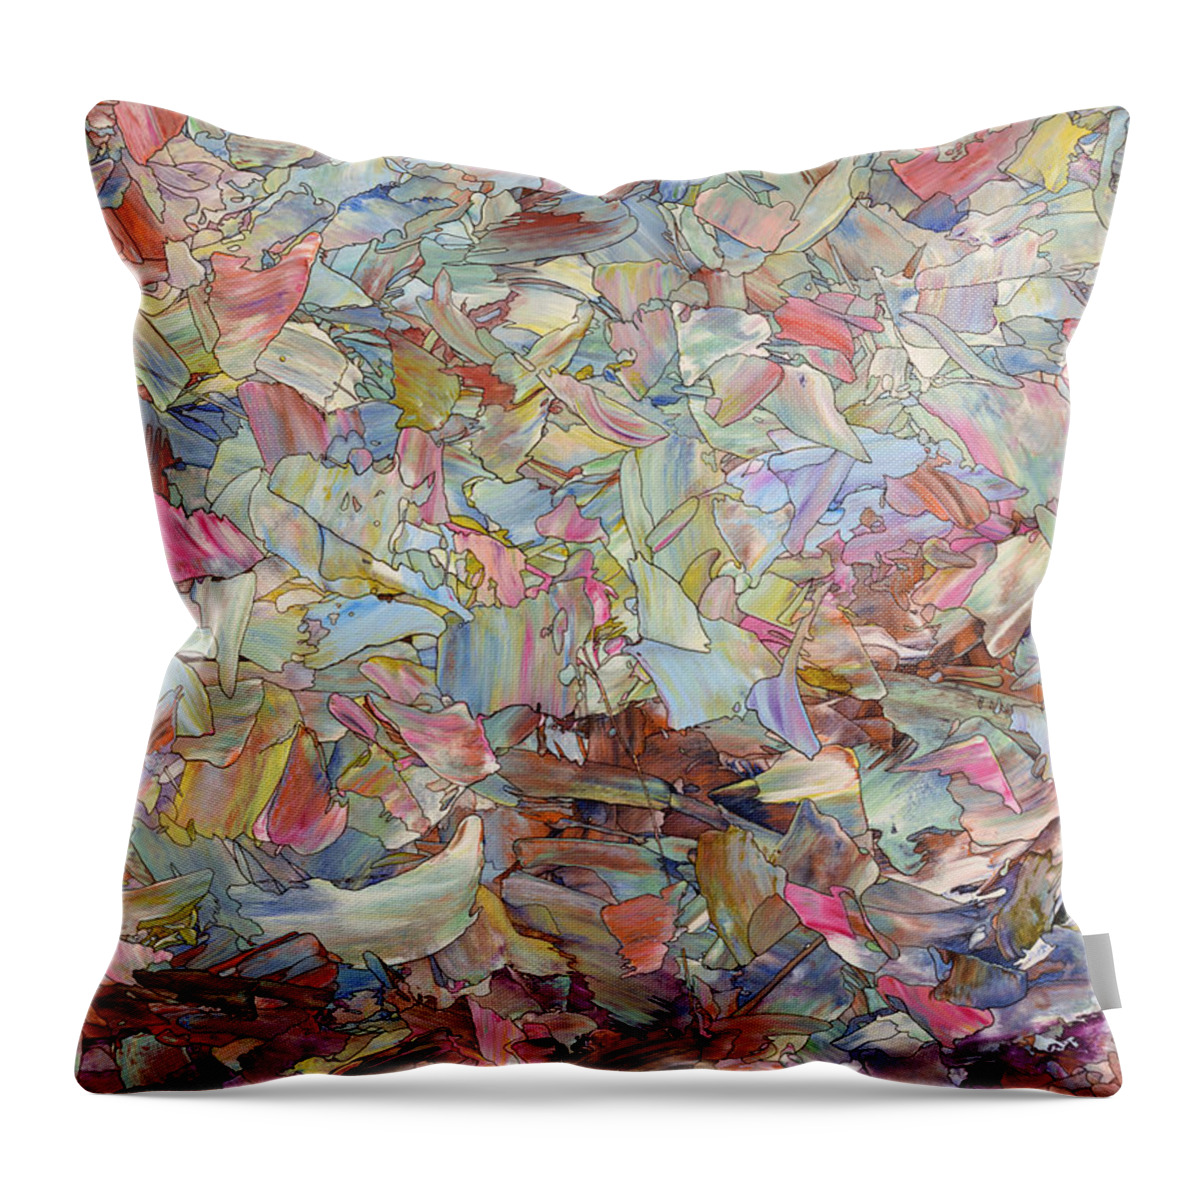 Abstract Throw Pillow featuring the painting Fragmented Hill by James W Johnson